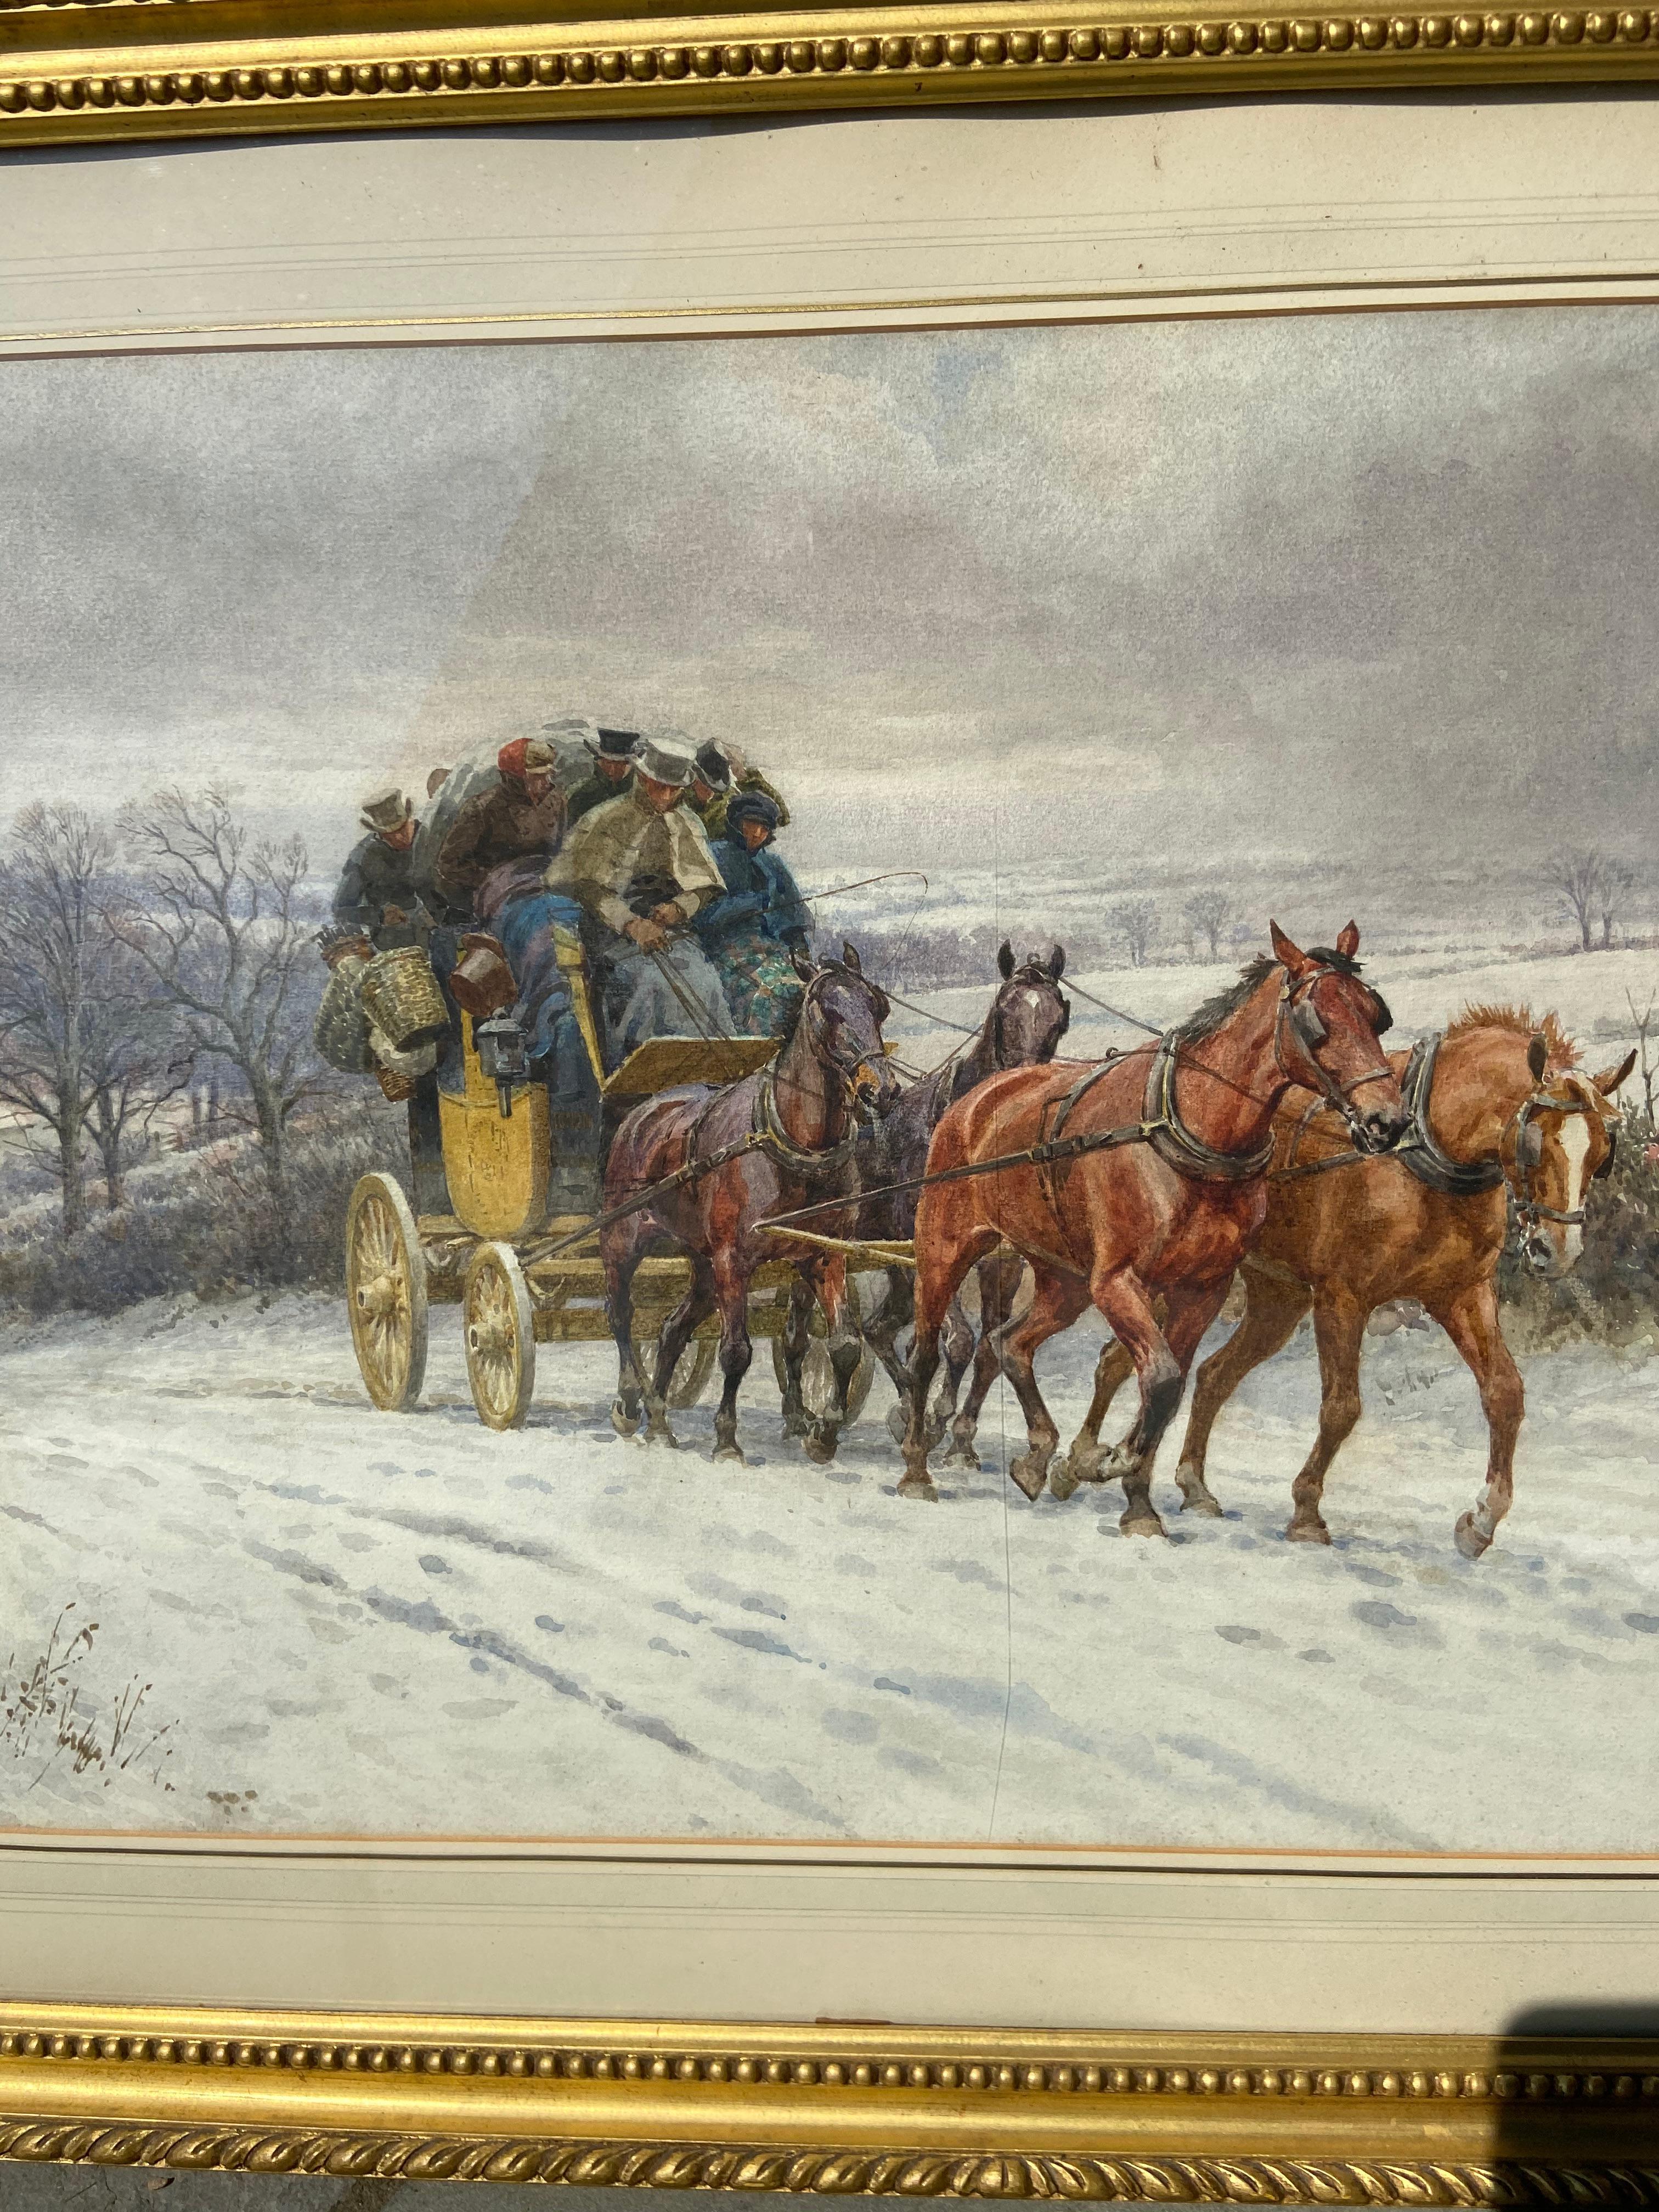 Gorgeous 19th Century Watercolour of a Horse-Drawn Carriage in the Snow - Painting by William Barnes Wollen